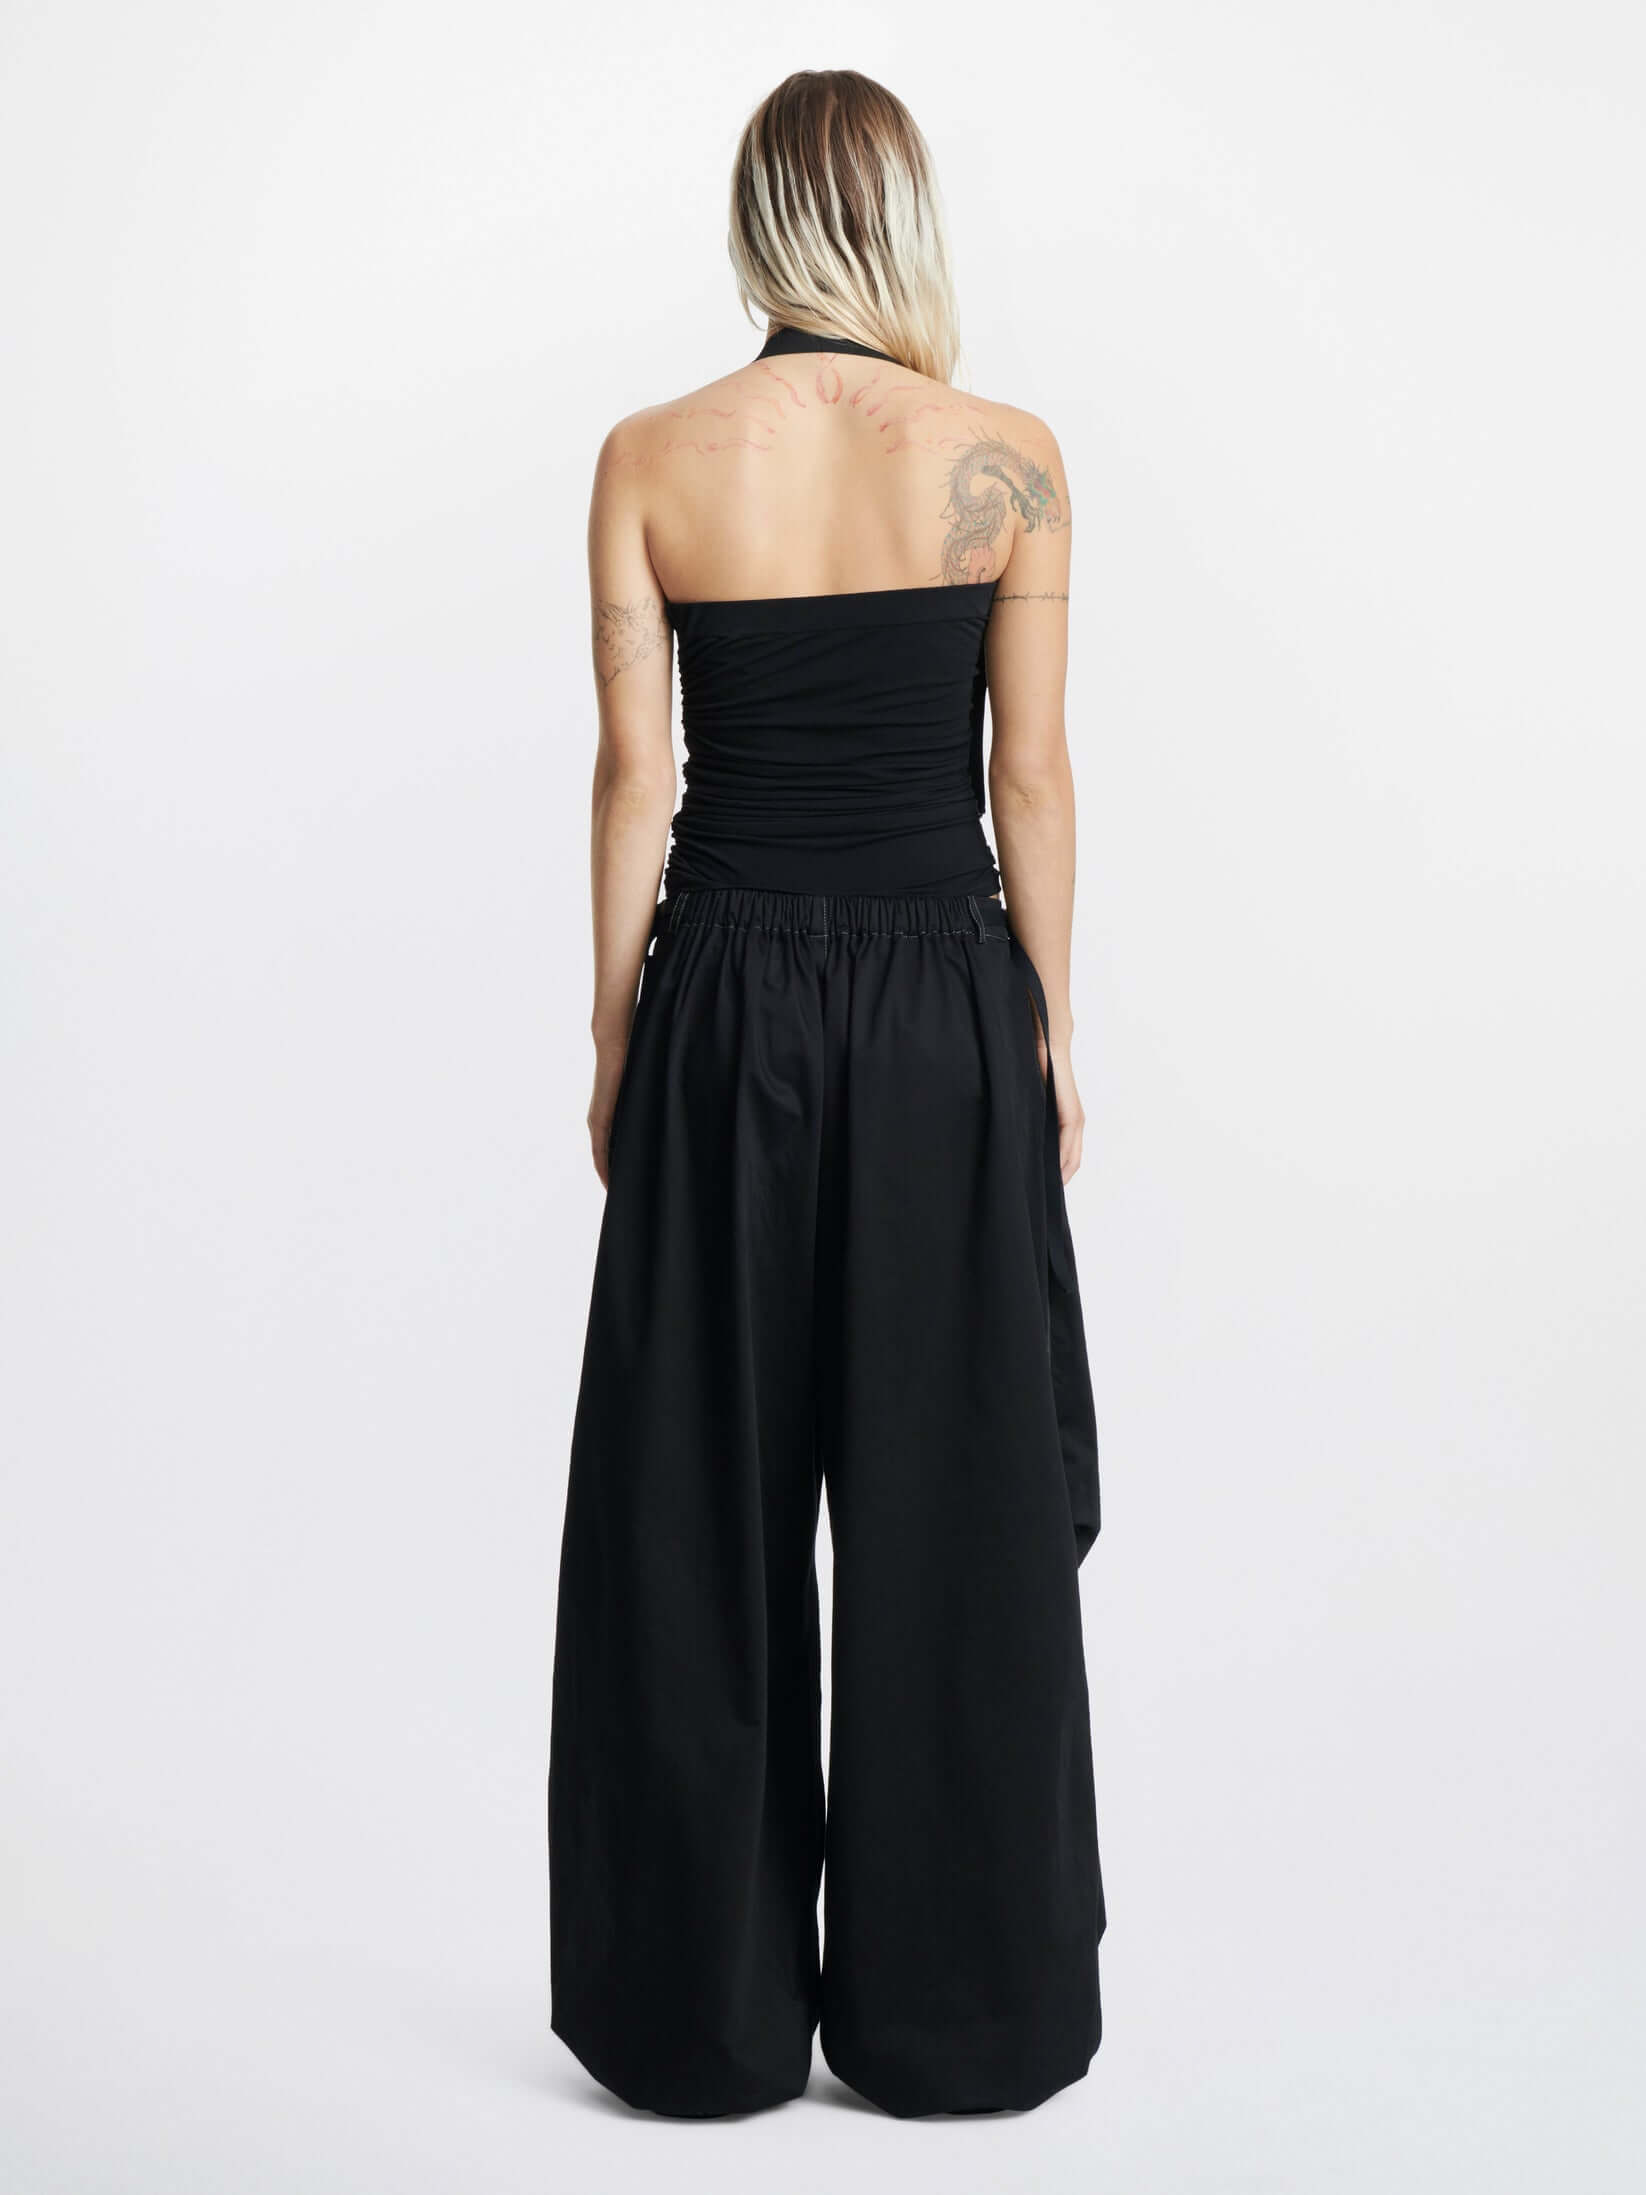 Dion Lee Oversized Flight Pant in Black available at The New Trend Australia.